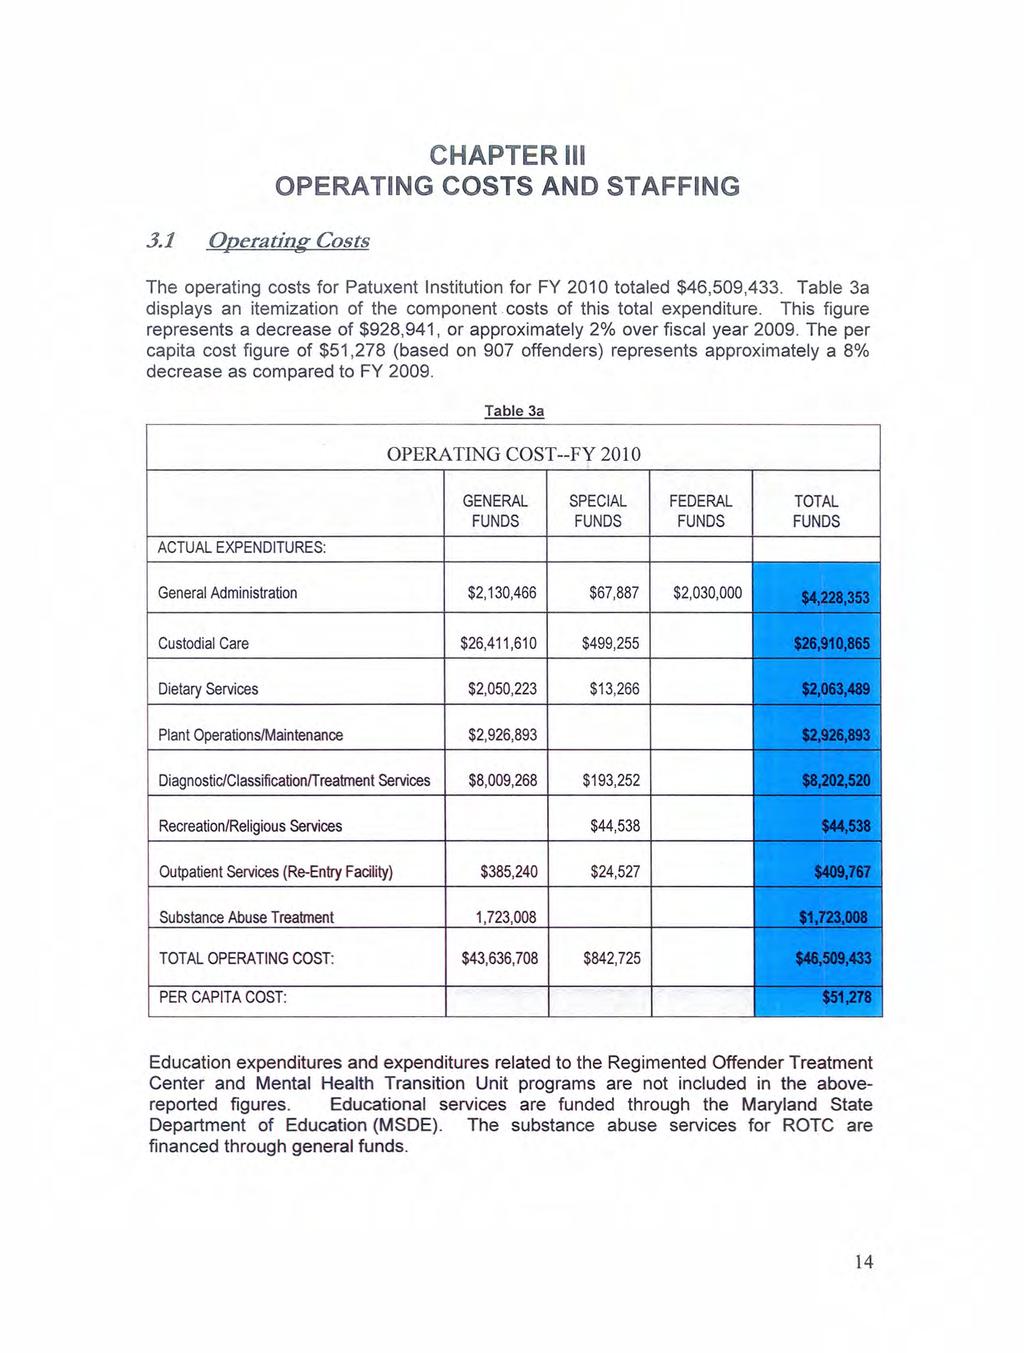 3.1 OperatingCosts CHAPTER III OPERATING COSTS AND STAFFING The operating costs for Patuxent Institution for FY 2010 totaled $46,509,433.